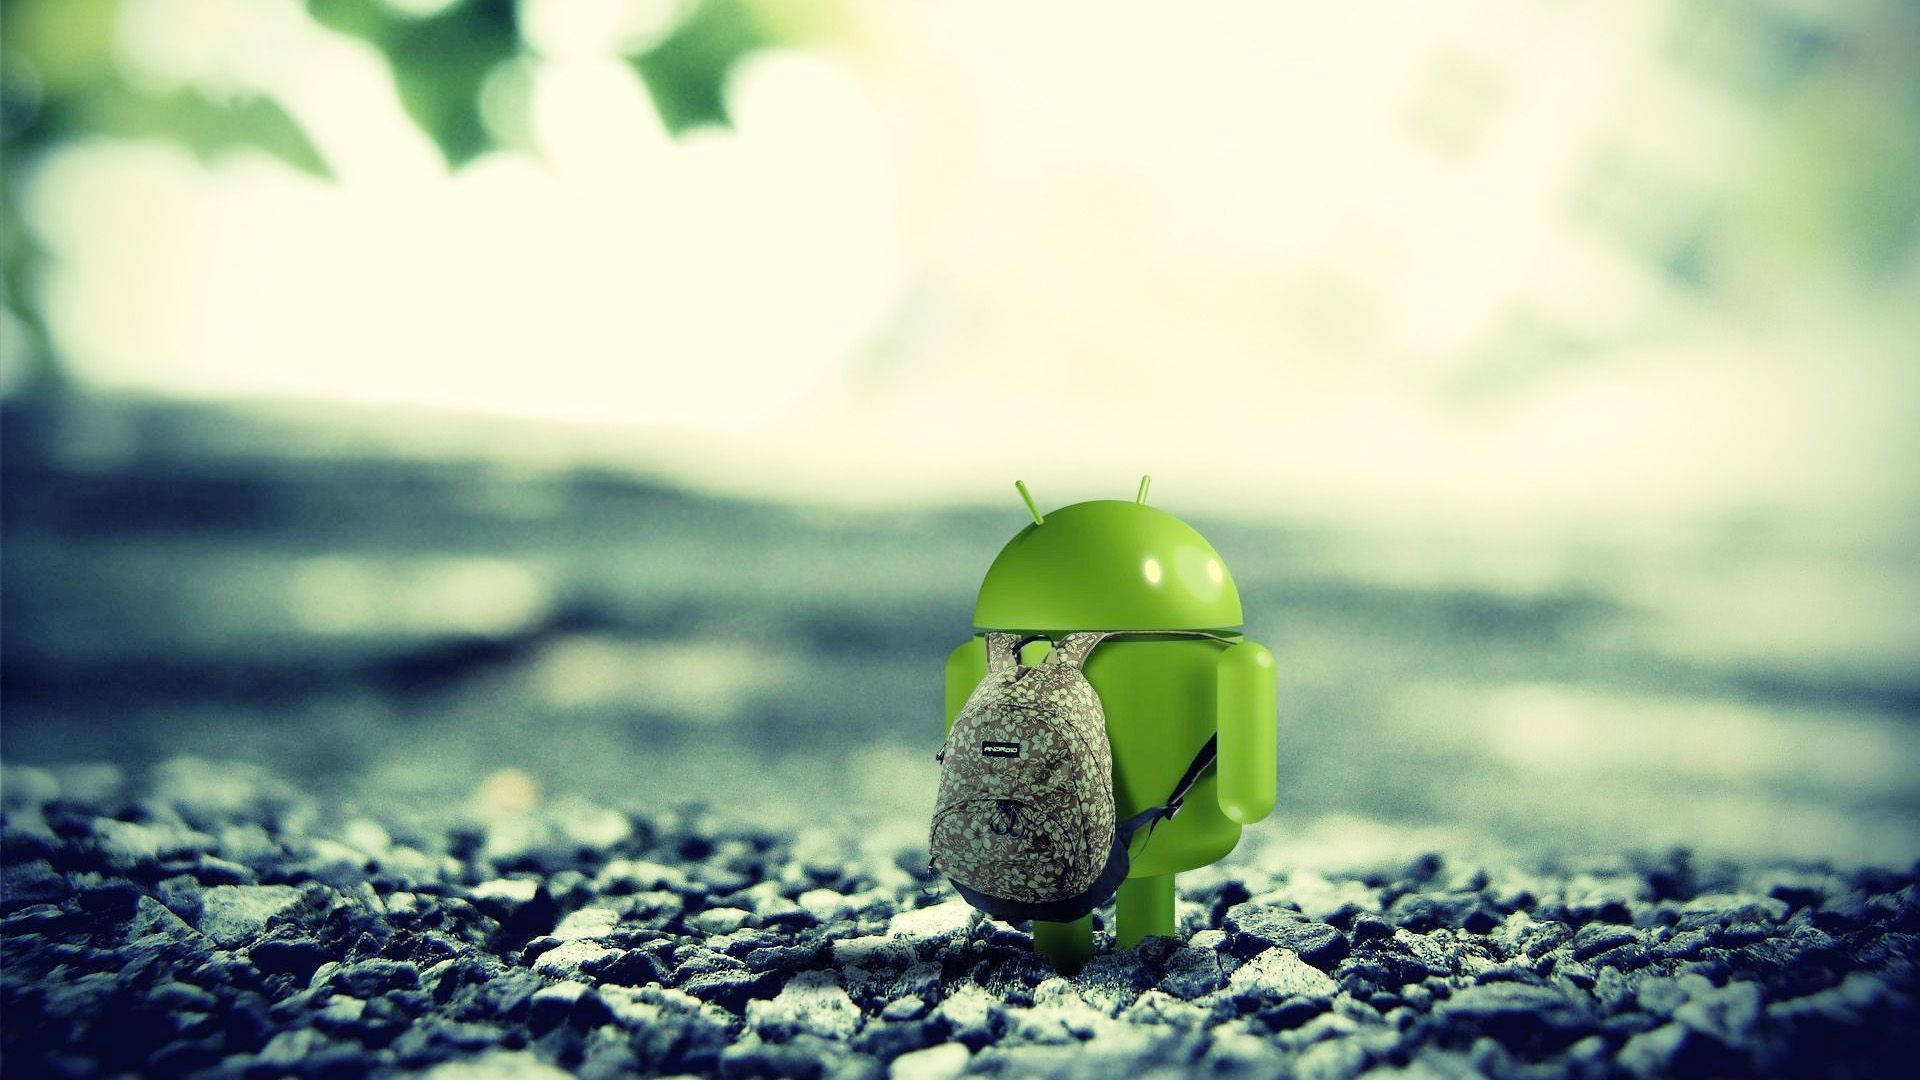 Cute Android Backpack Laptop Background